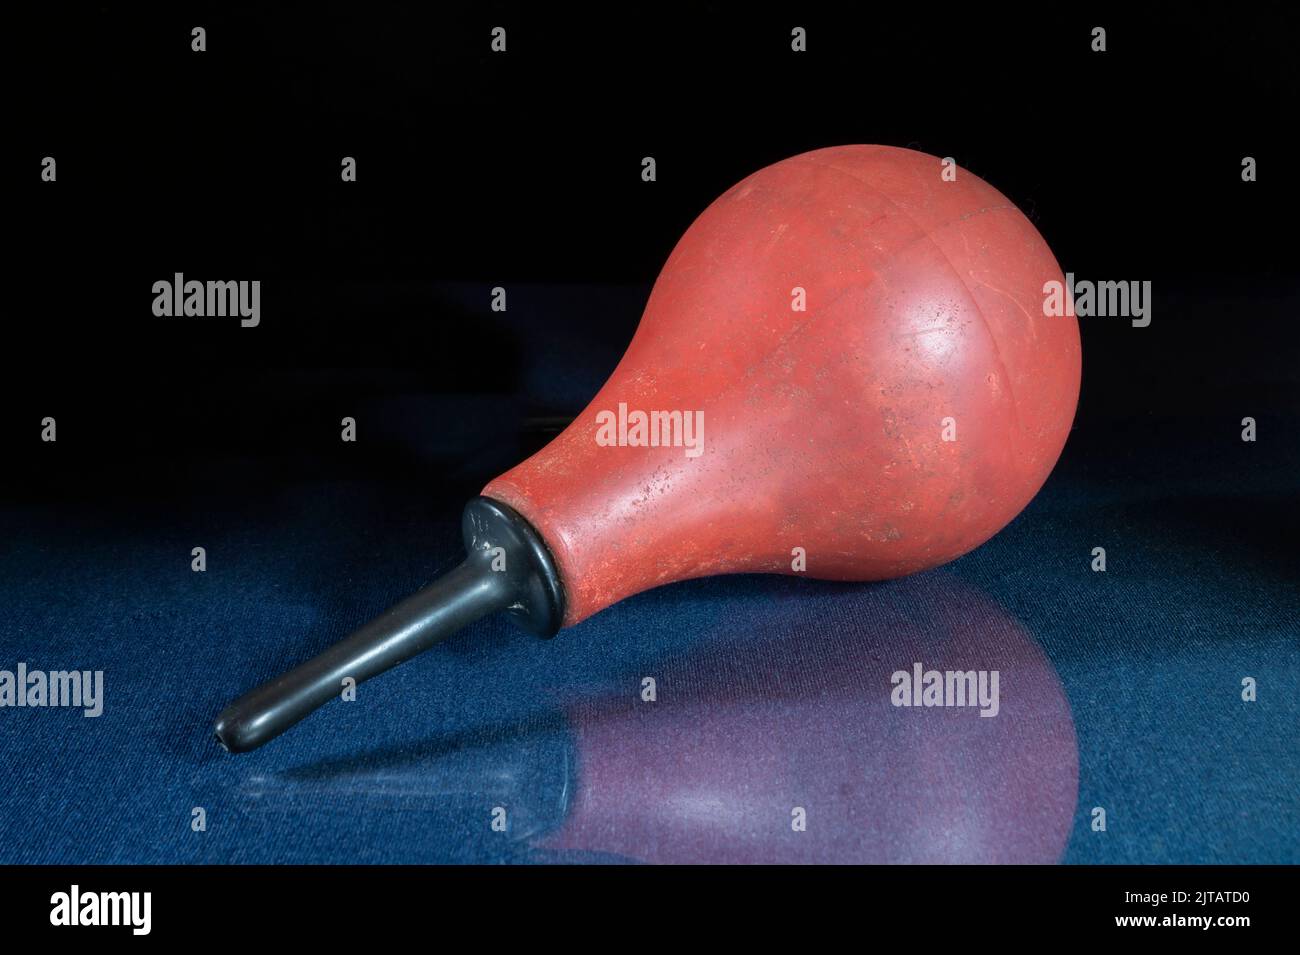 Medical instrument for treatment on a glass table. A rubber pear on a black background. Stock Photo